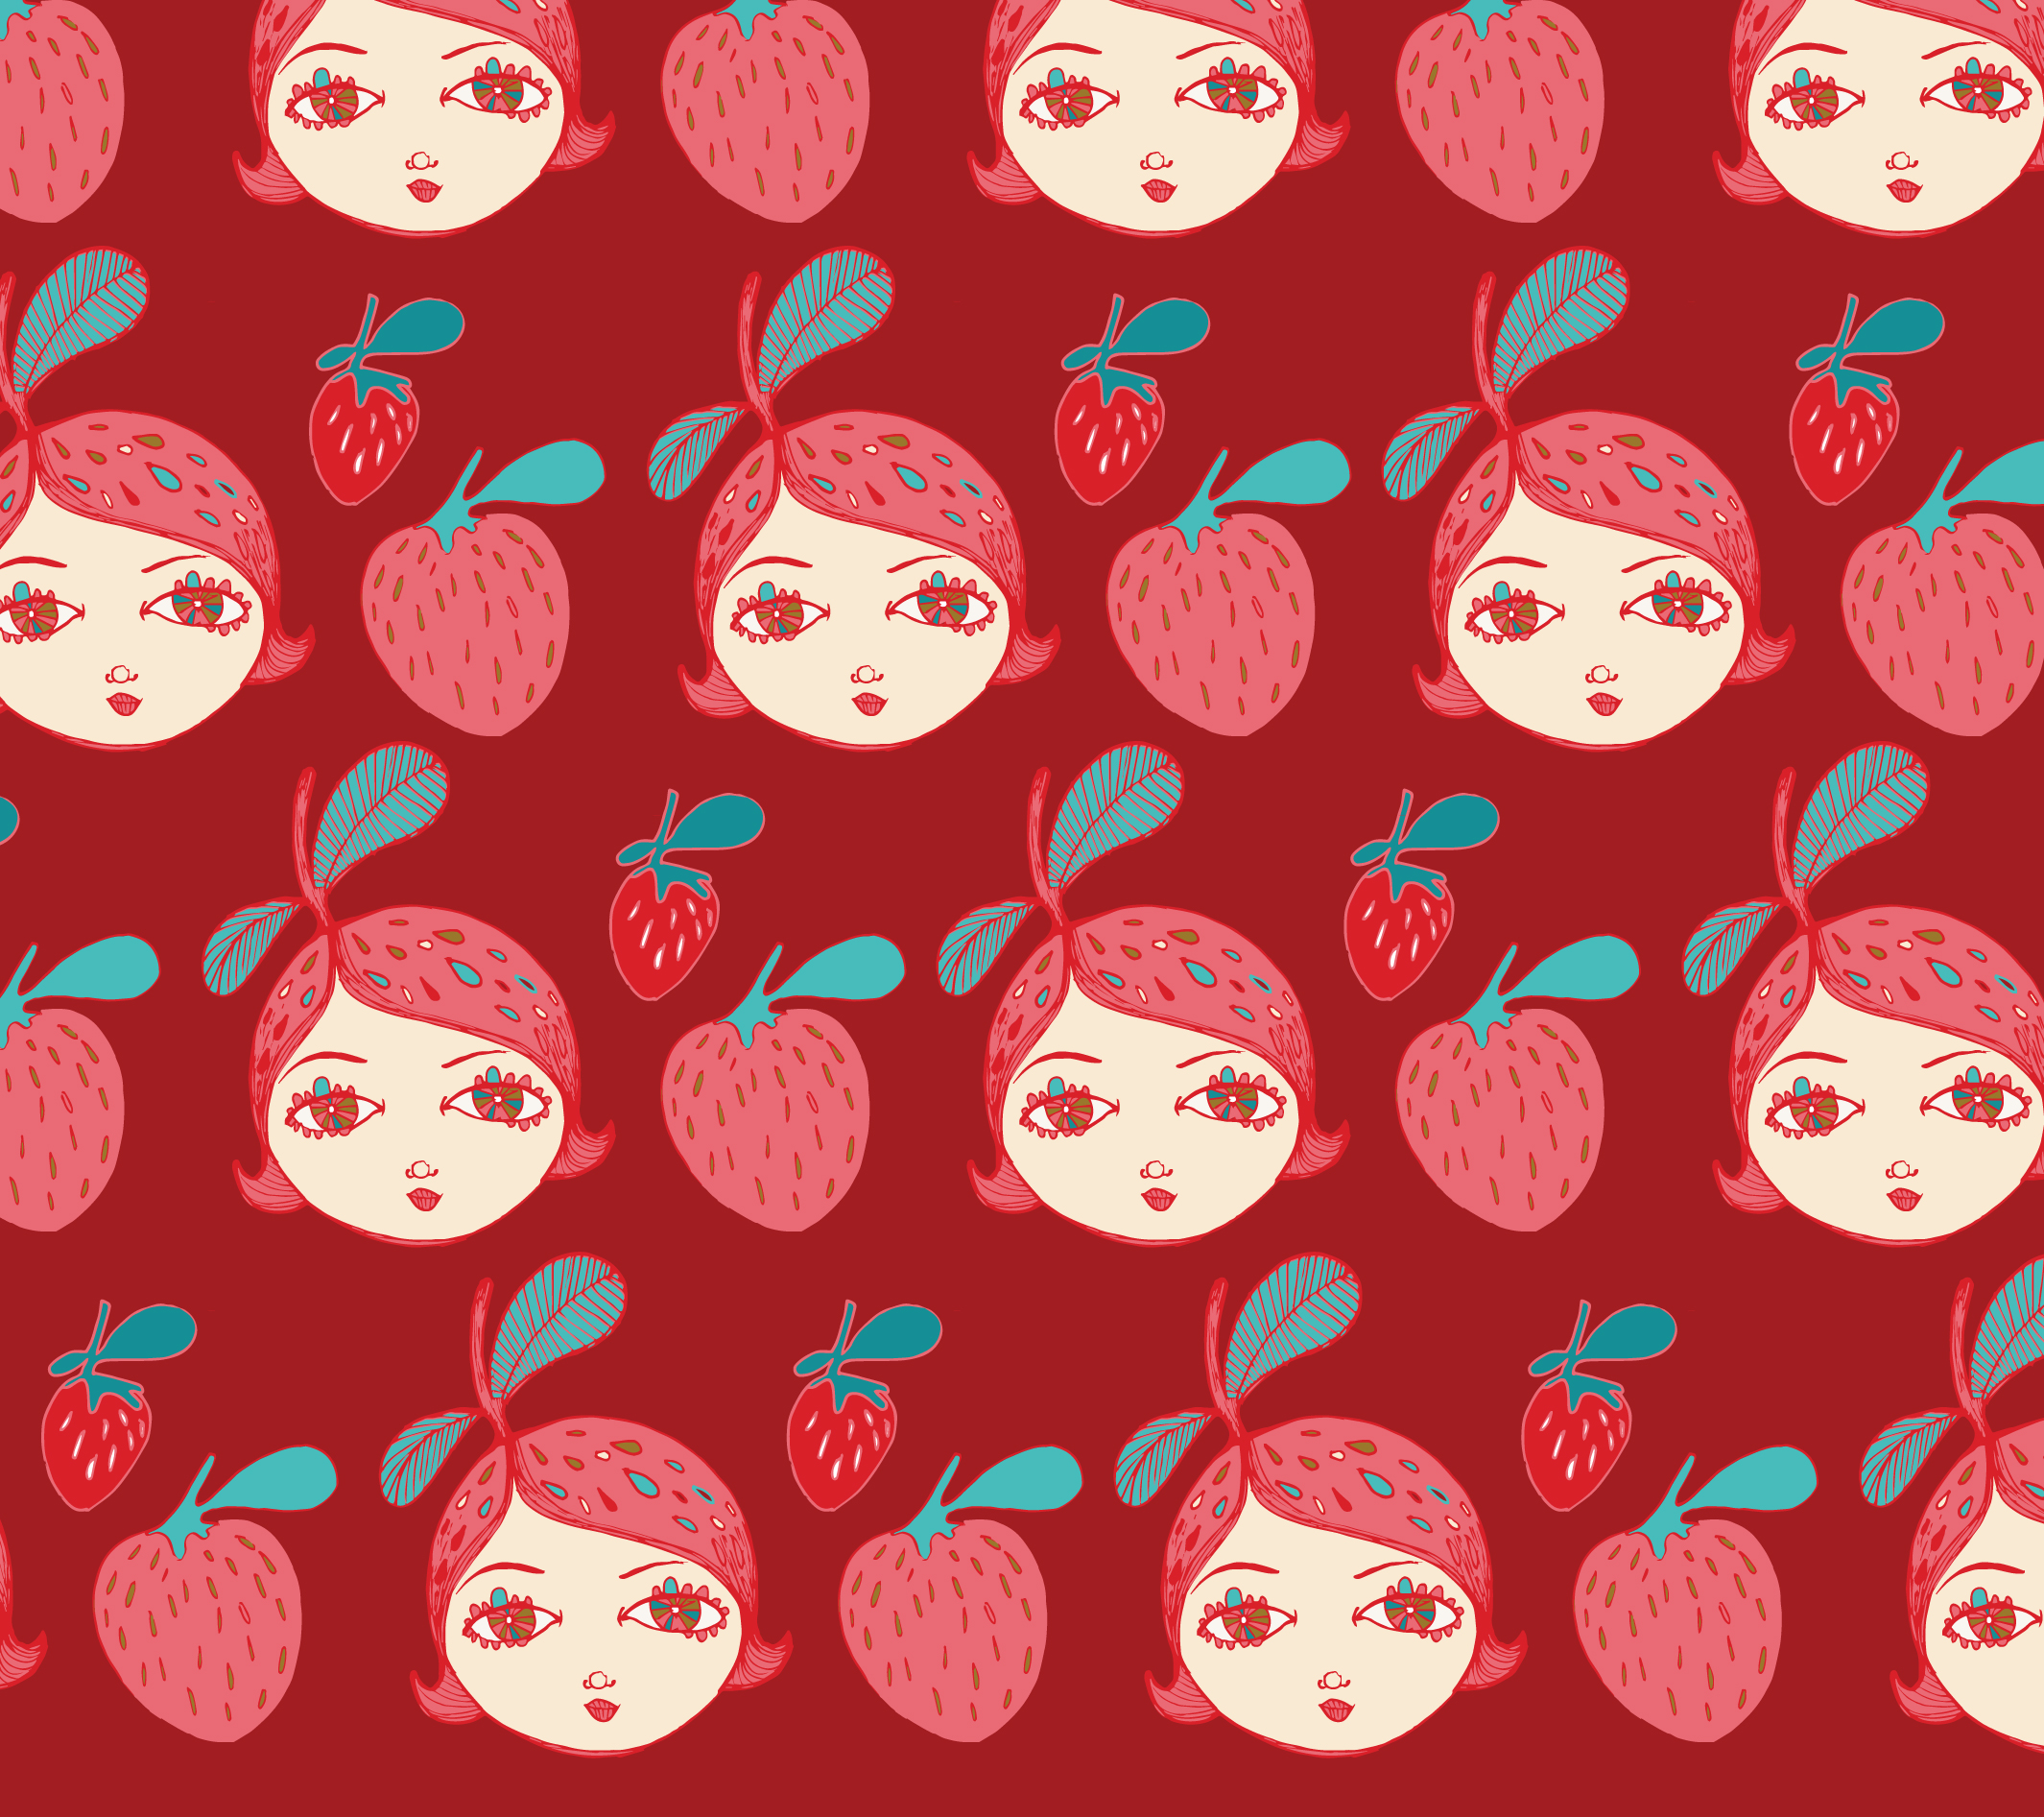 BB_PyrexFruits_Coord_12_strawberries.jpg